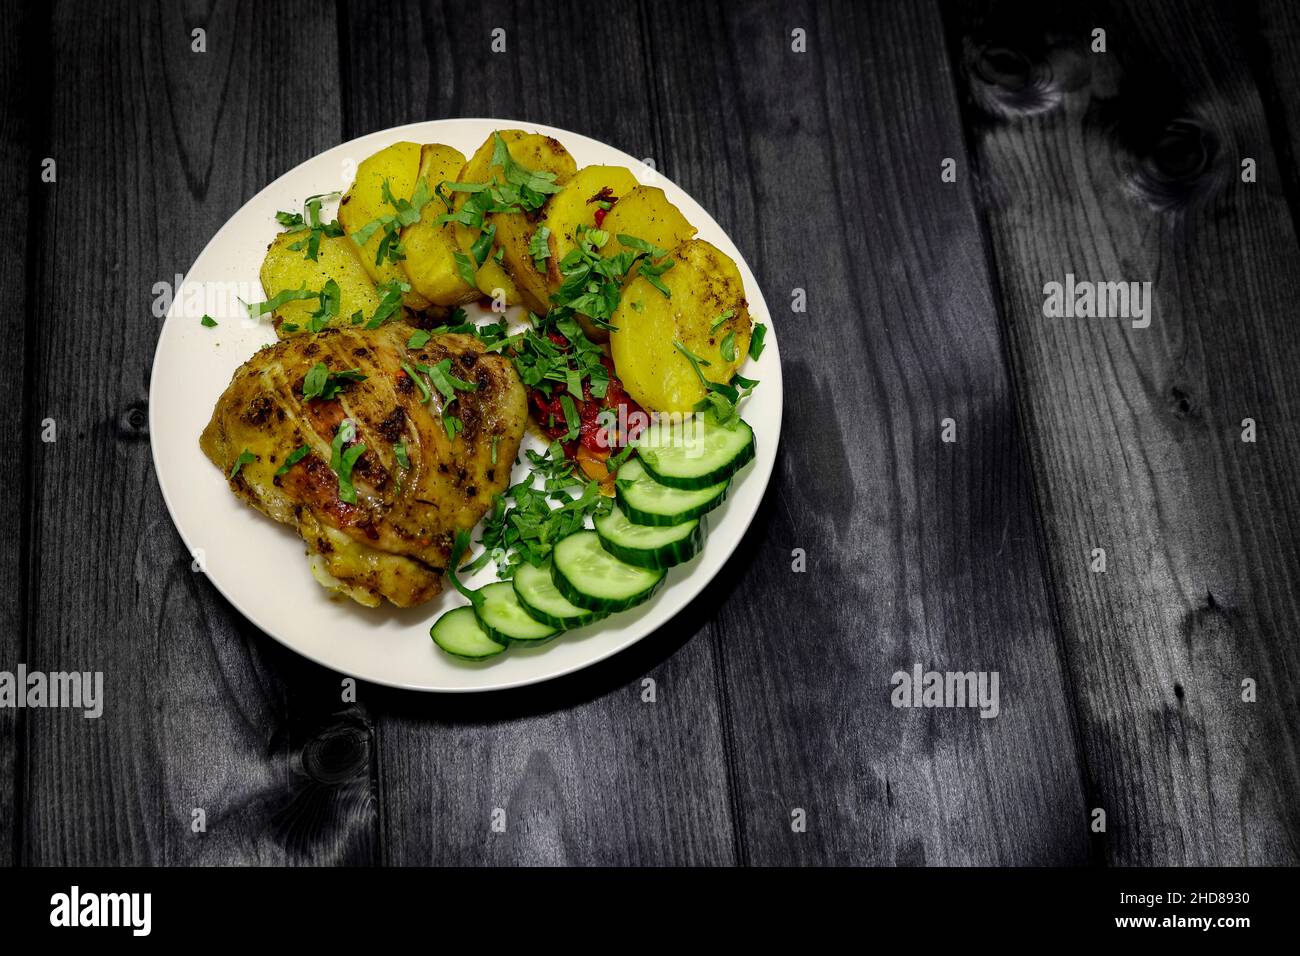 A dish with baked chicken and potatoes, garnished with green parsley and sliced cucumber, top view. On a dark wooden background. Stock Photo